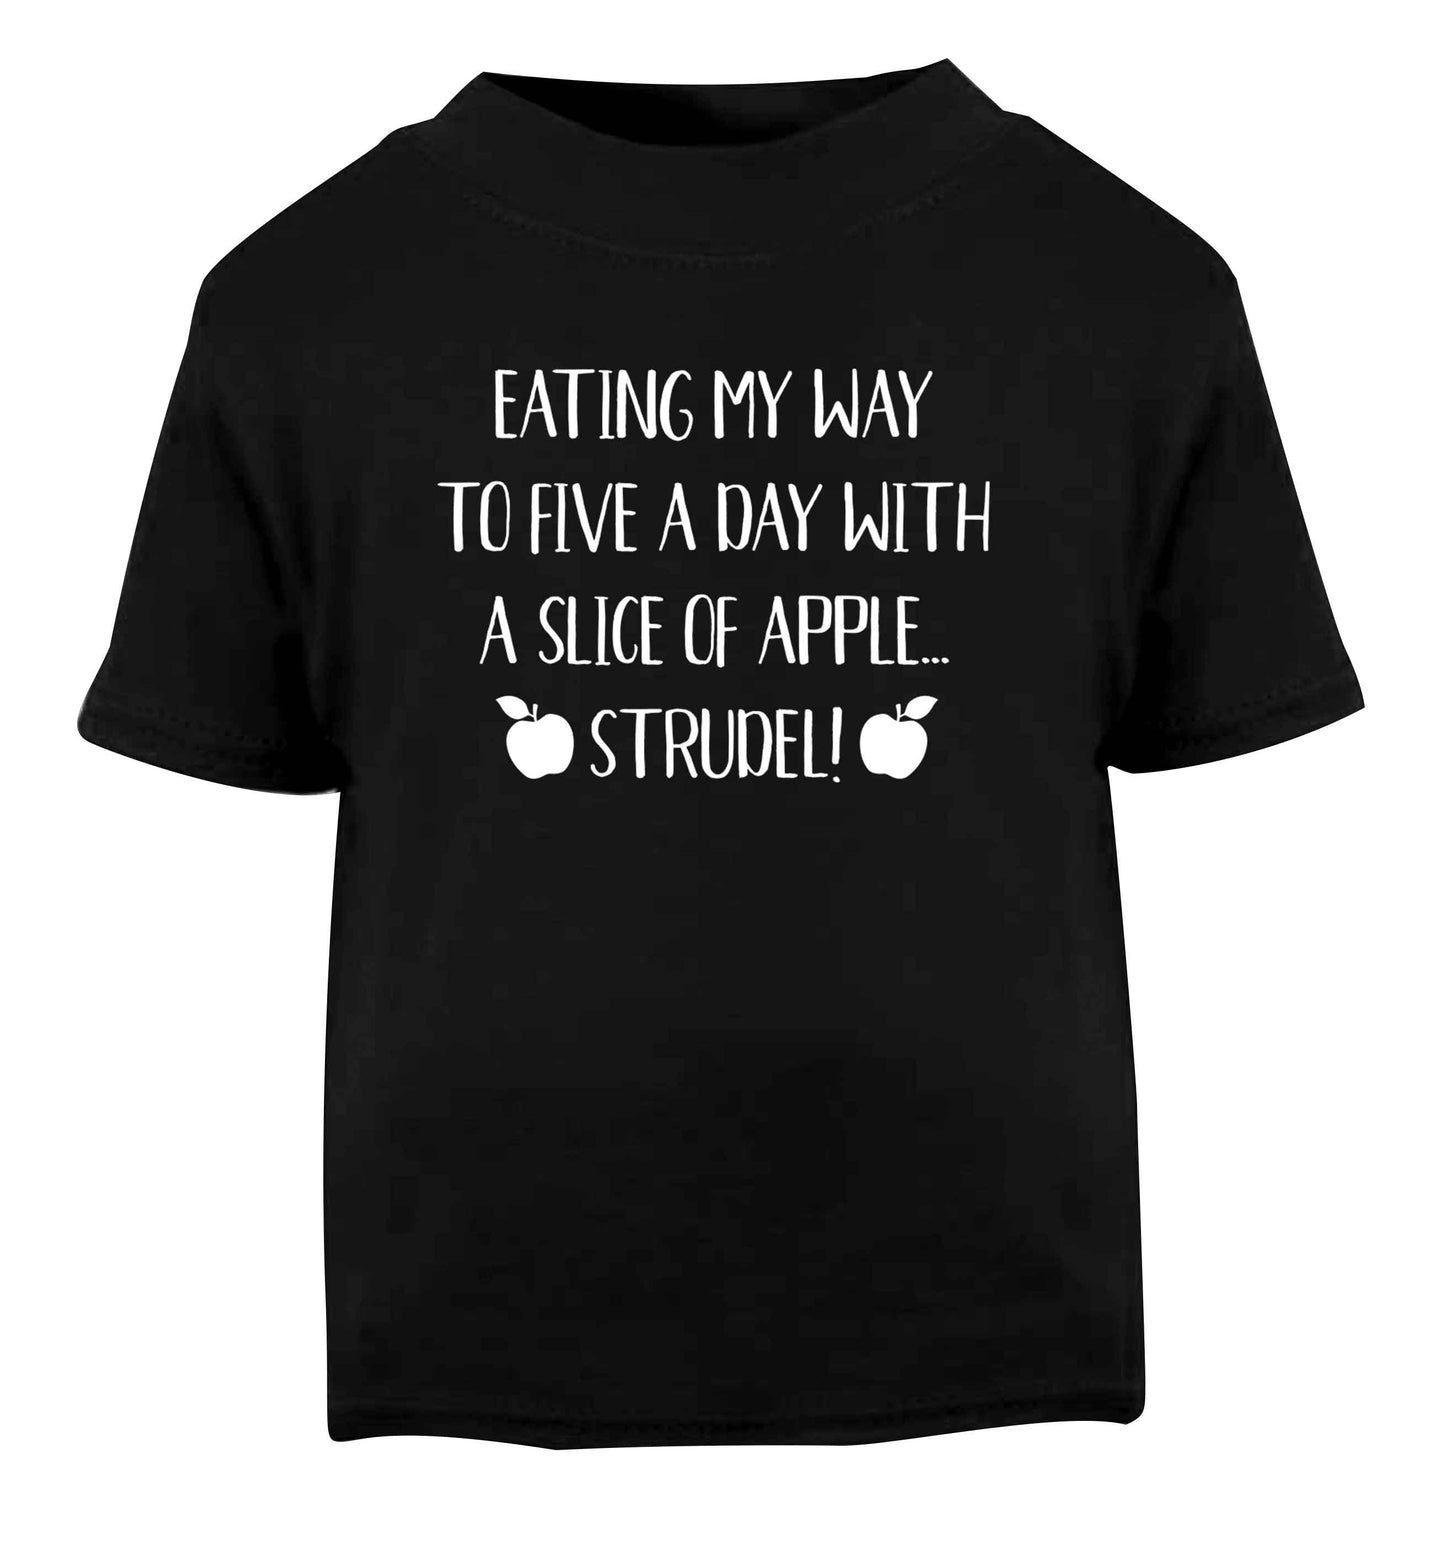 Eating my way to five a day with a slice of apple strudel Black Baby Toddler Tshirt 2 years